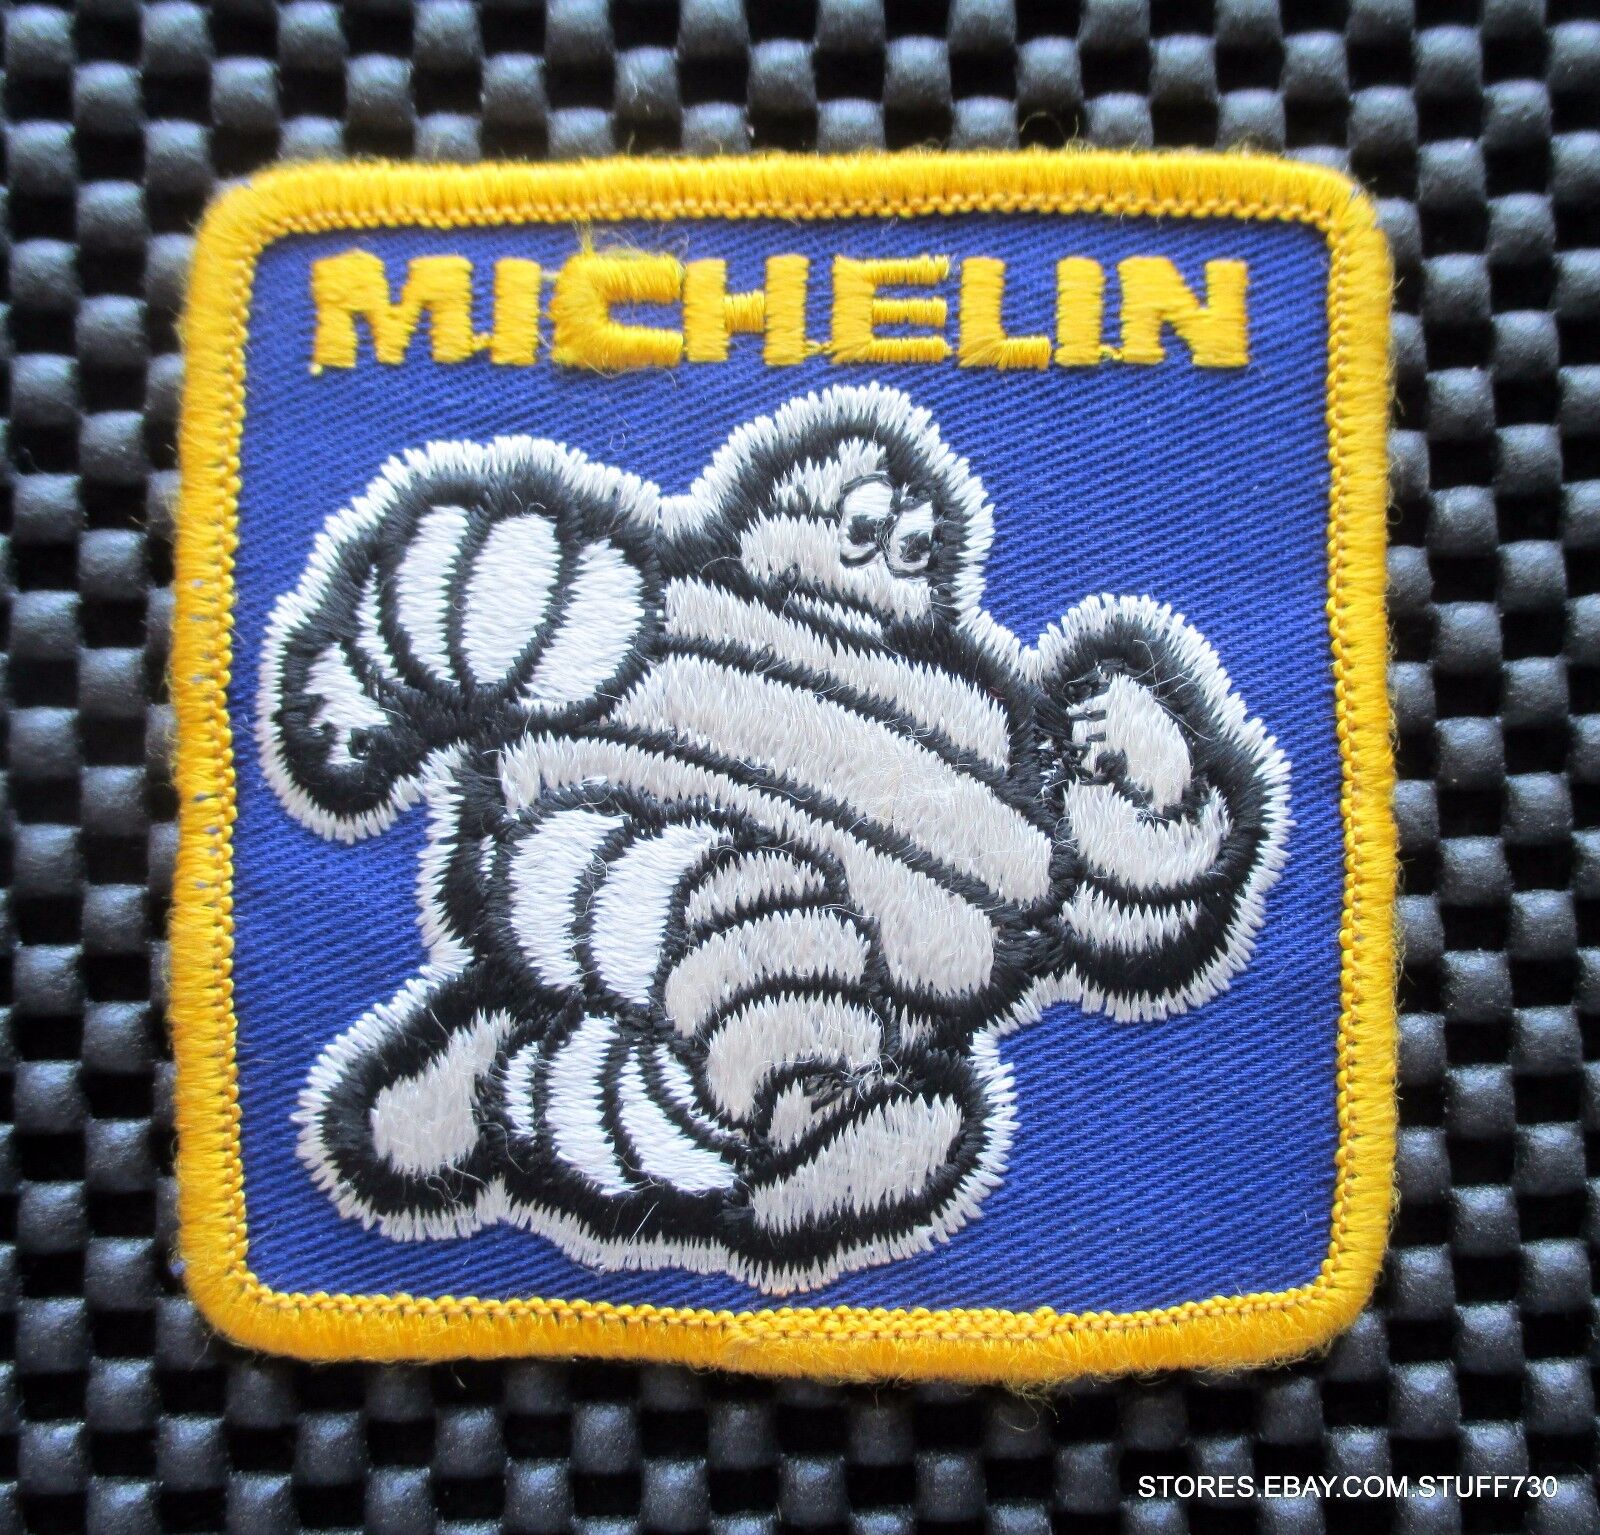 MICHELIN TIRES SEW ON PATCH MICHELIN MAN ADVERTISING UNIFORM 3\